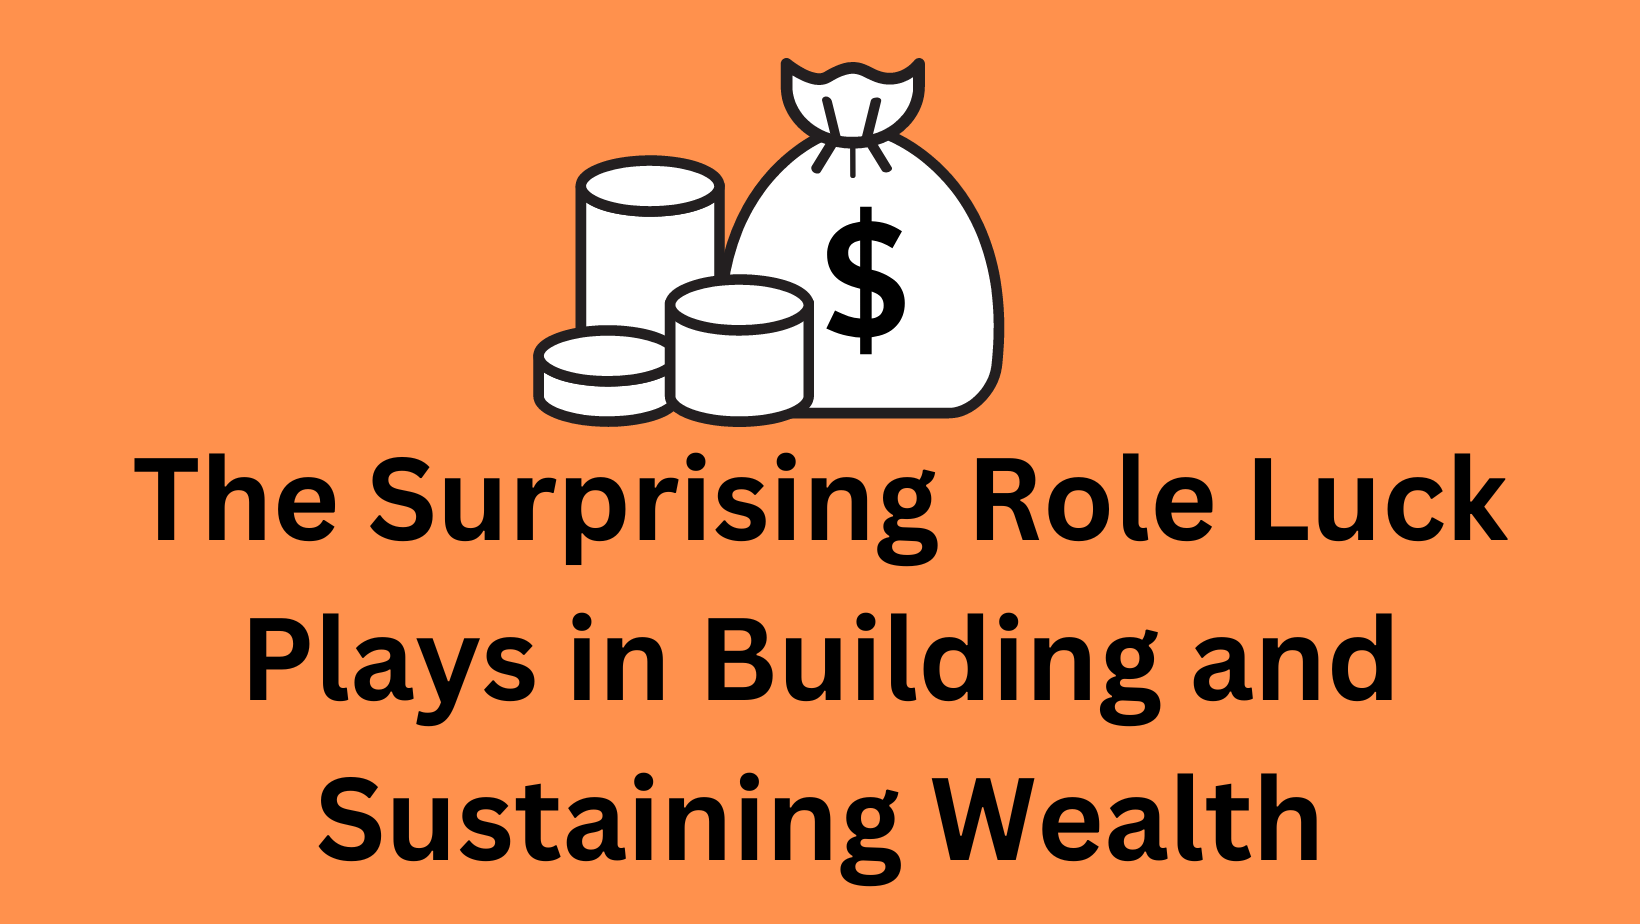 @iskafan/the-surprising-role-luck-plays-in-building-and-sustaining-wealth